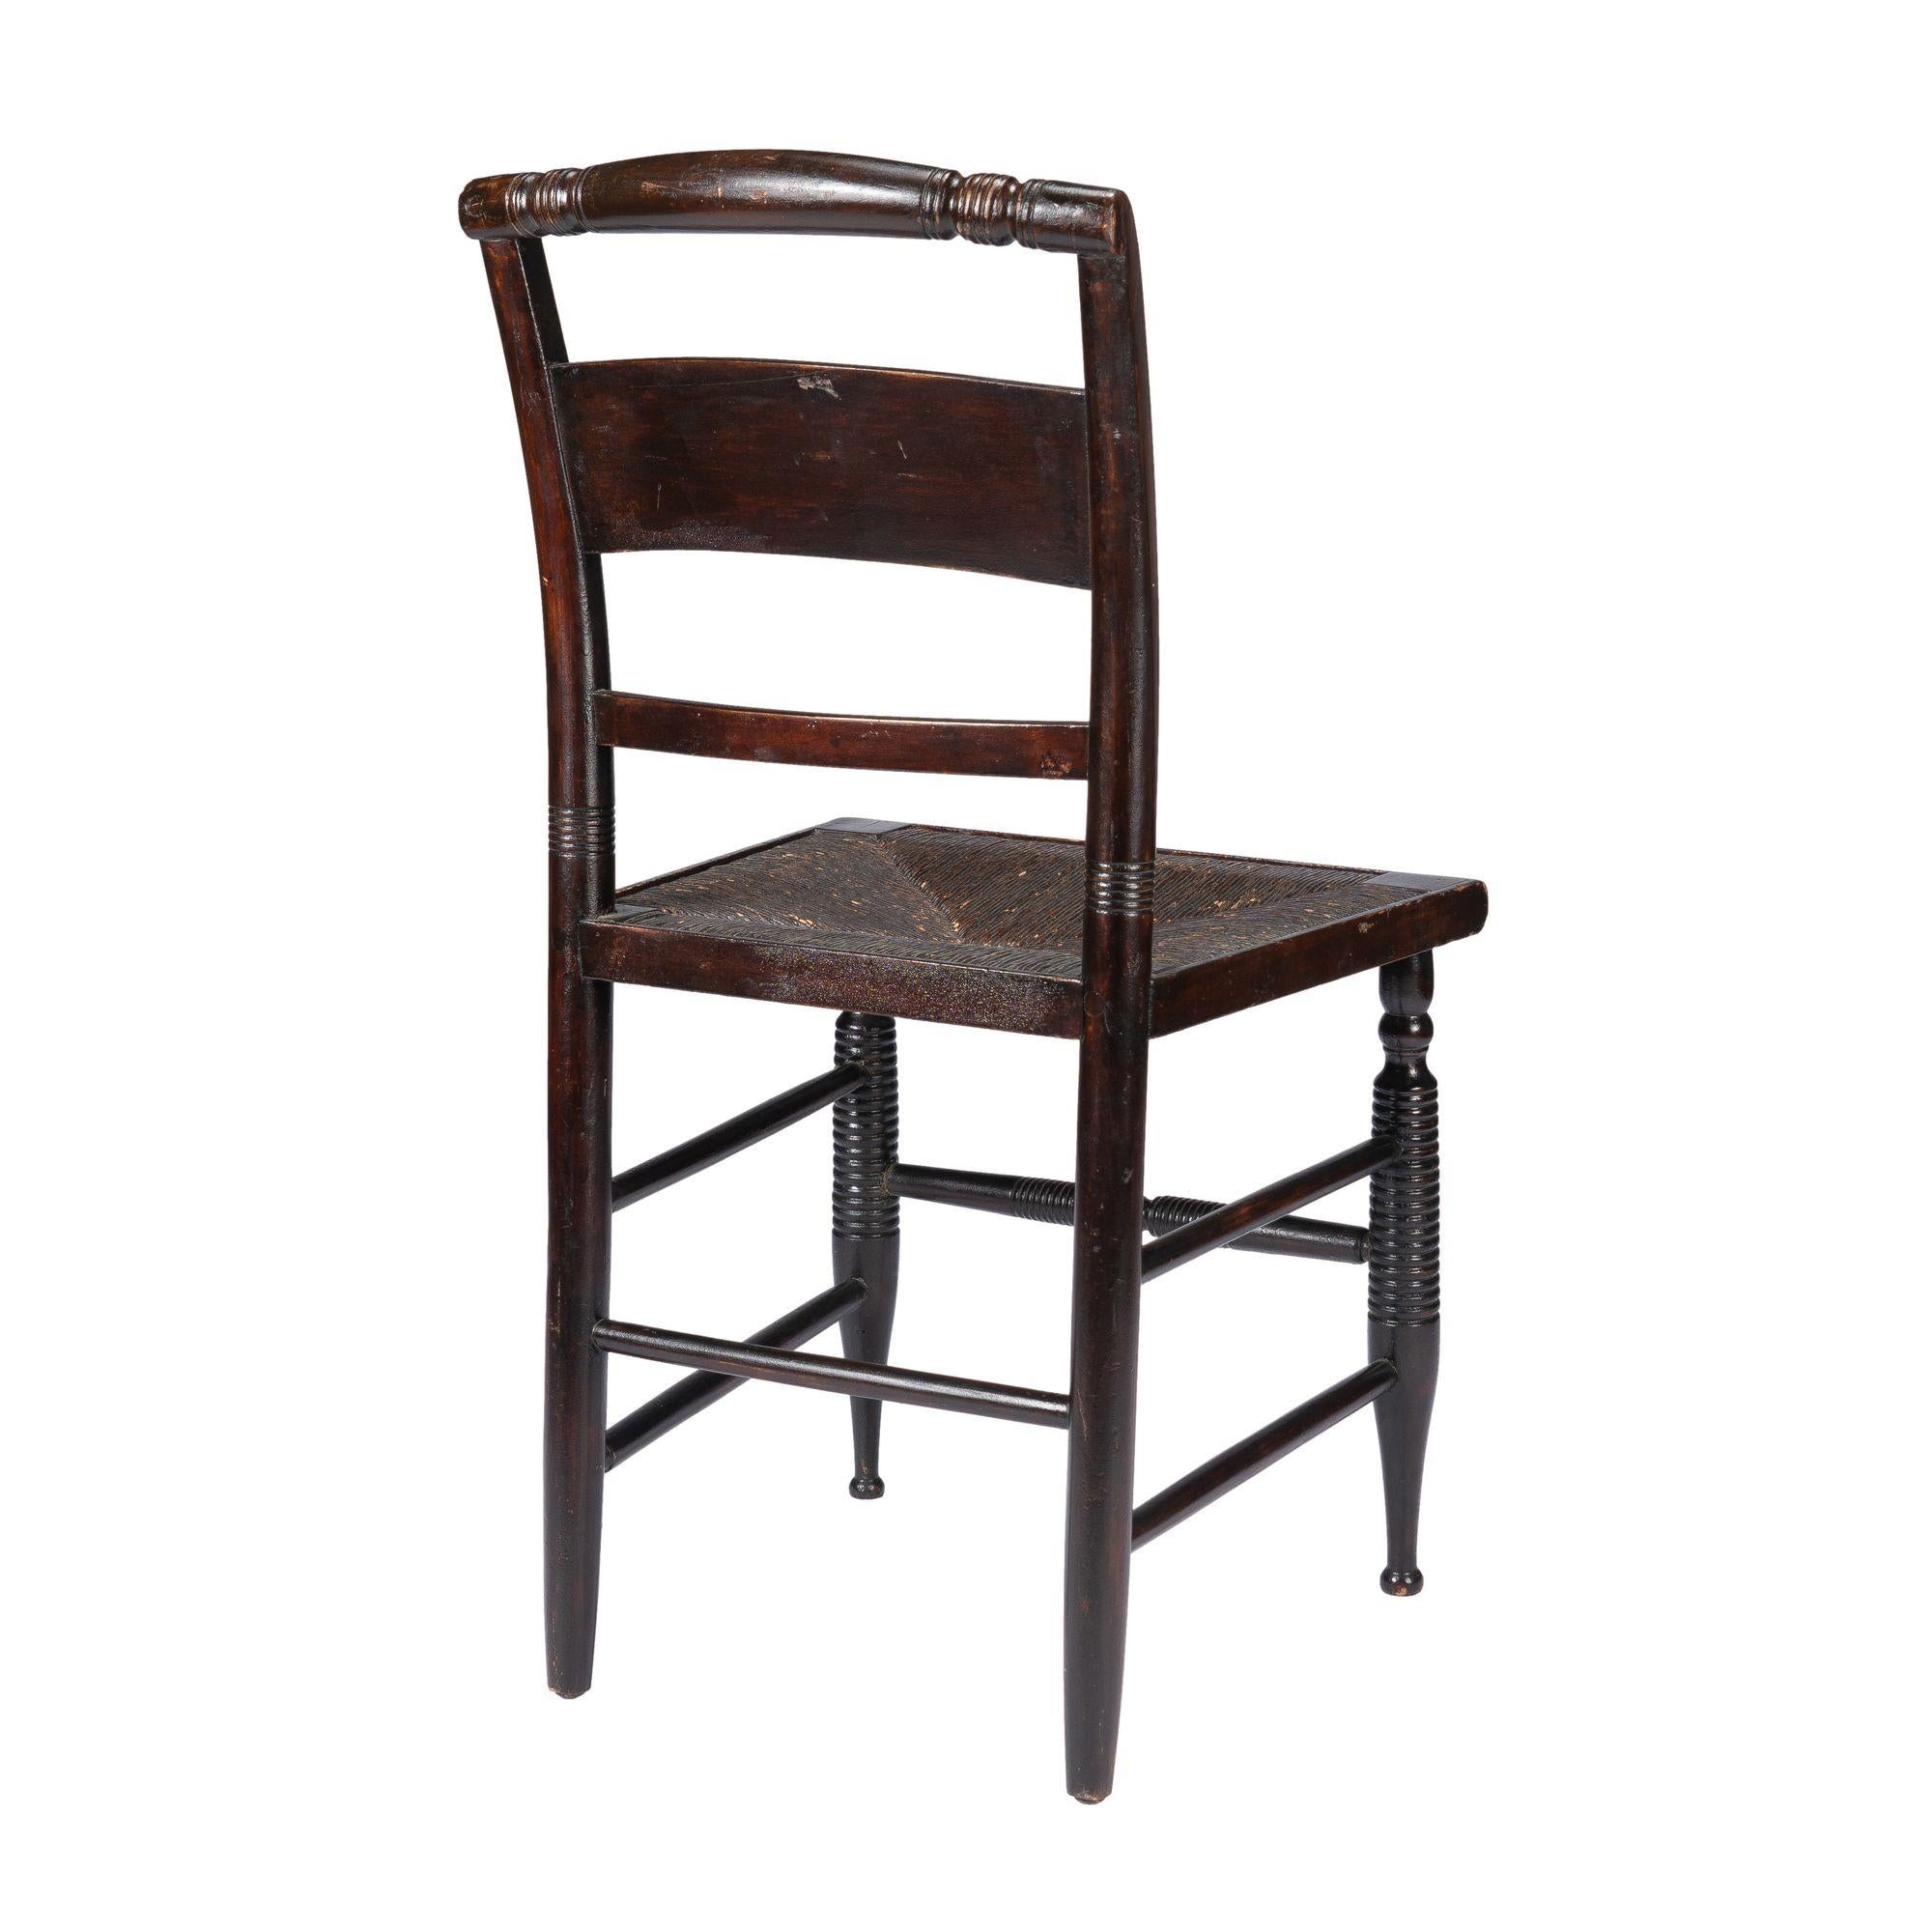 Rush Connecticut Valley Hitchcock rush seat side chair, 1820